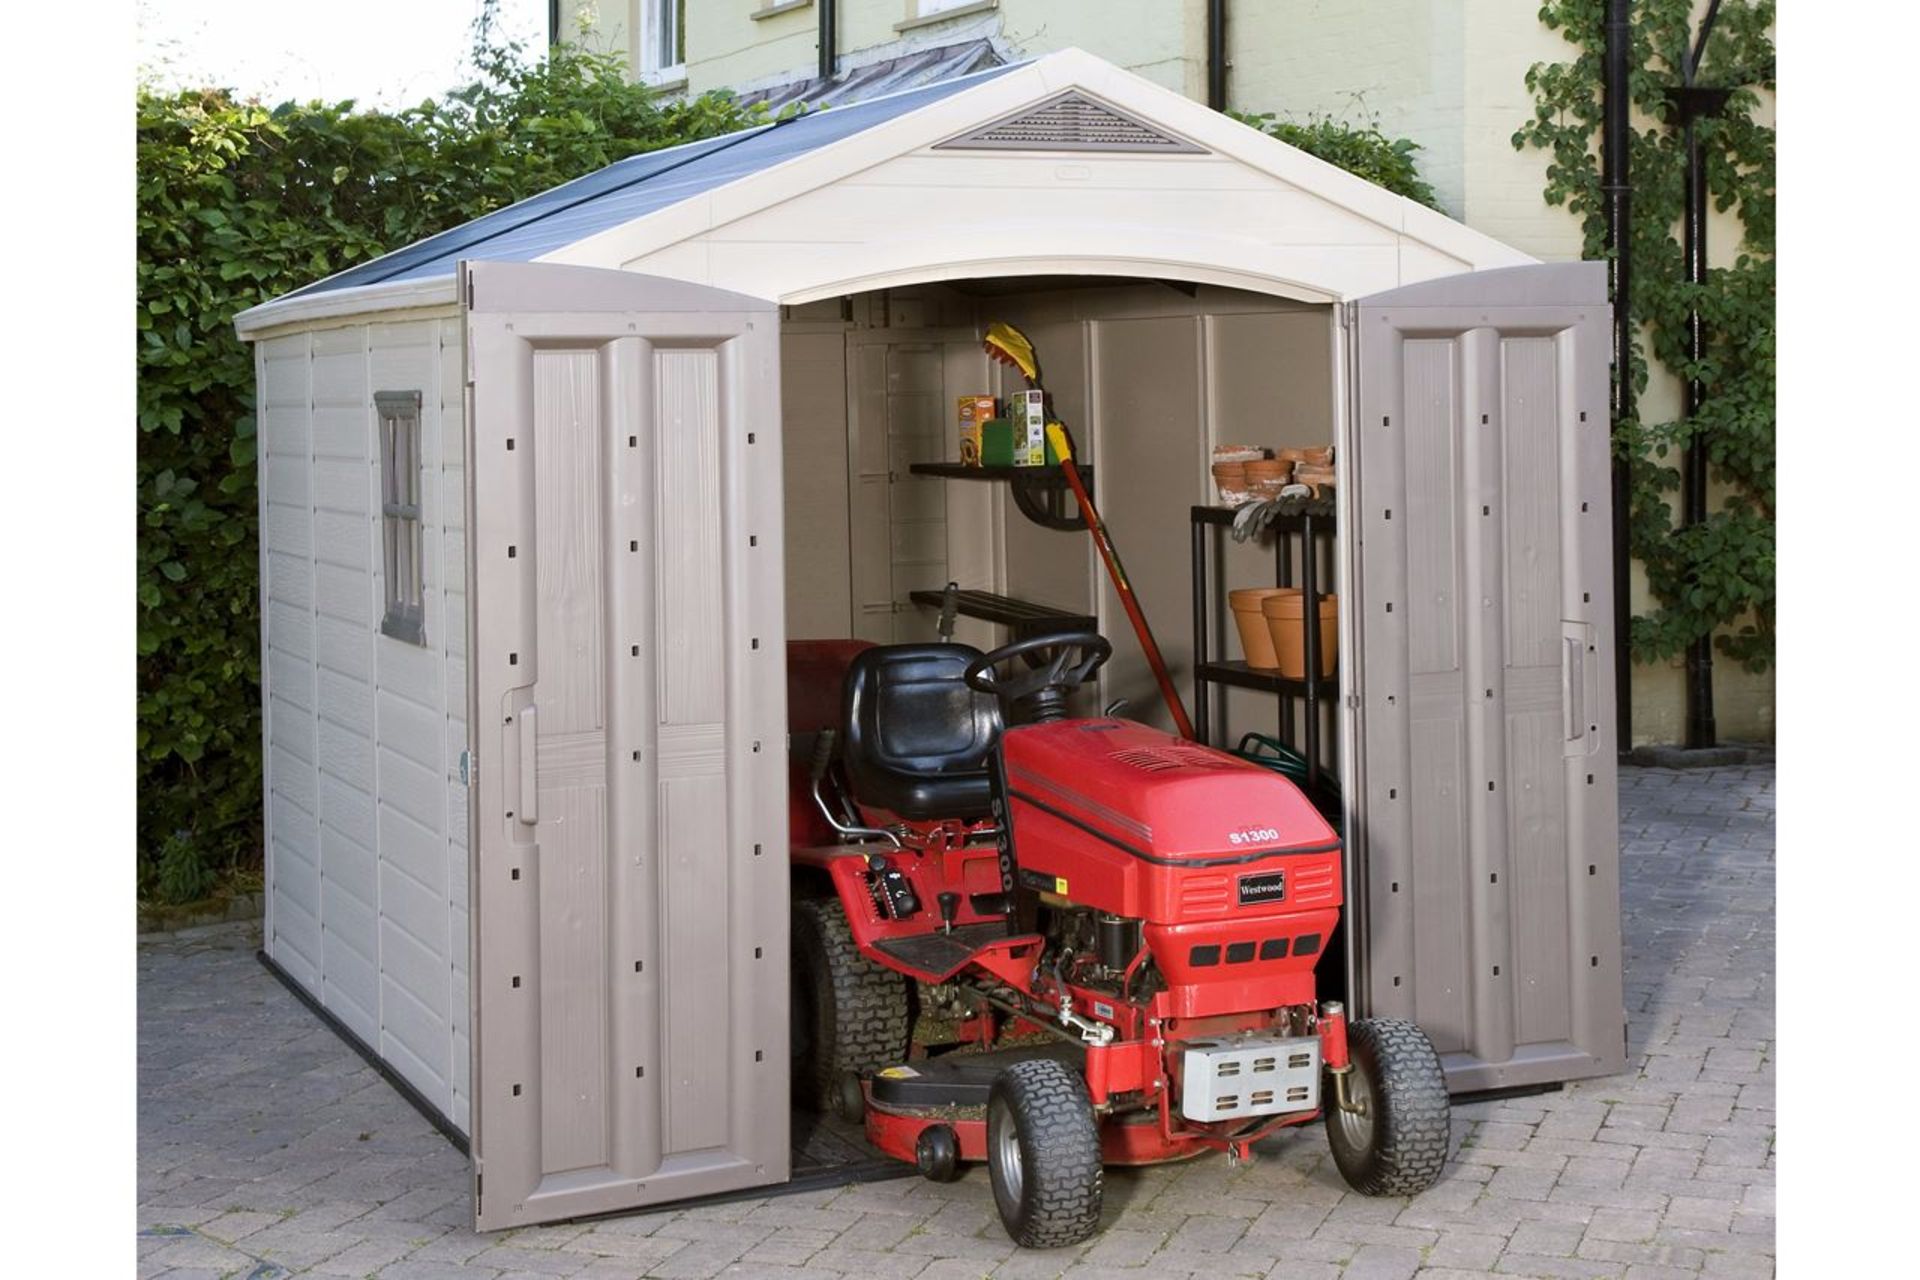 Keter Factor 8 x 11 Shed RRP £899 The extremely spacious Factor 8x11